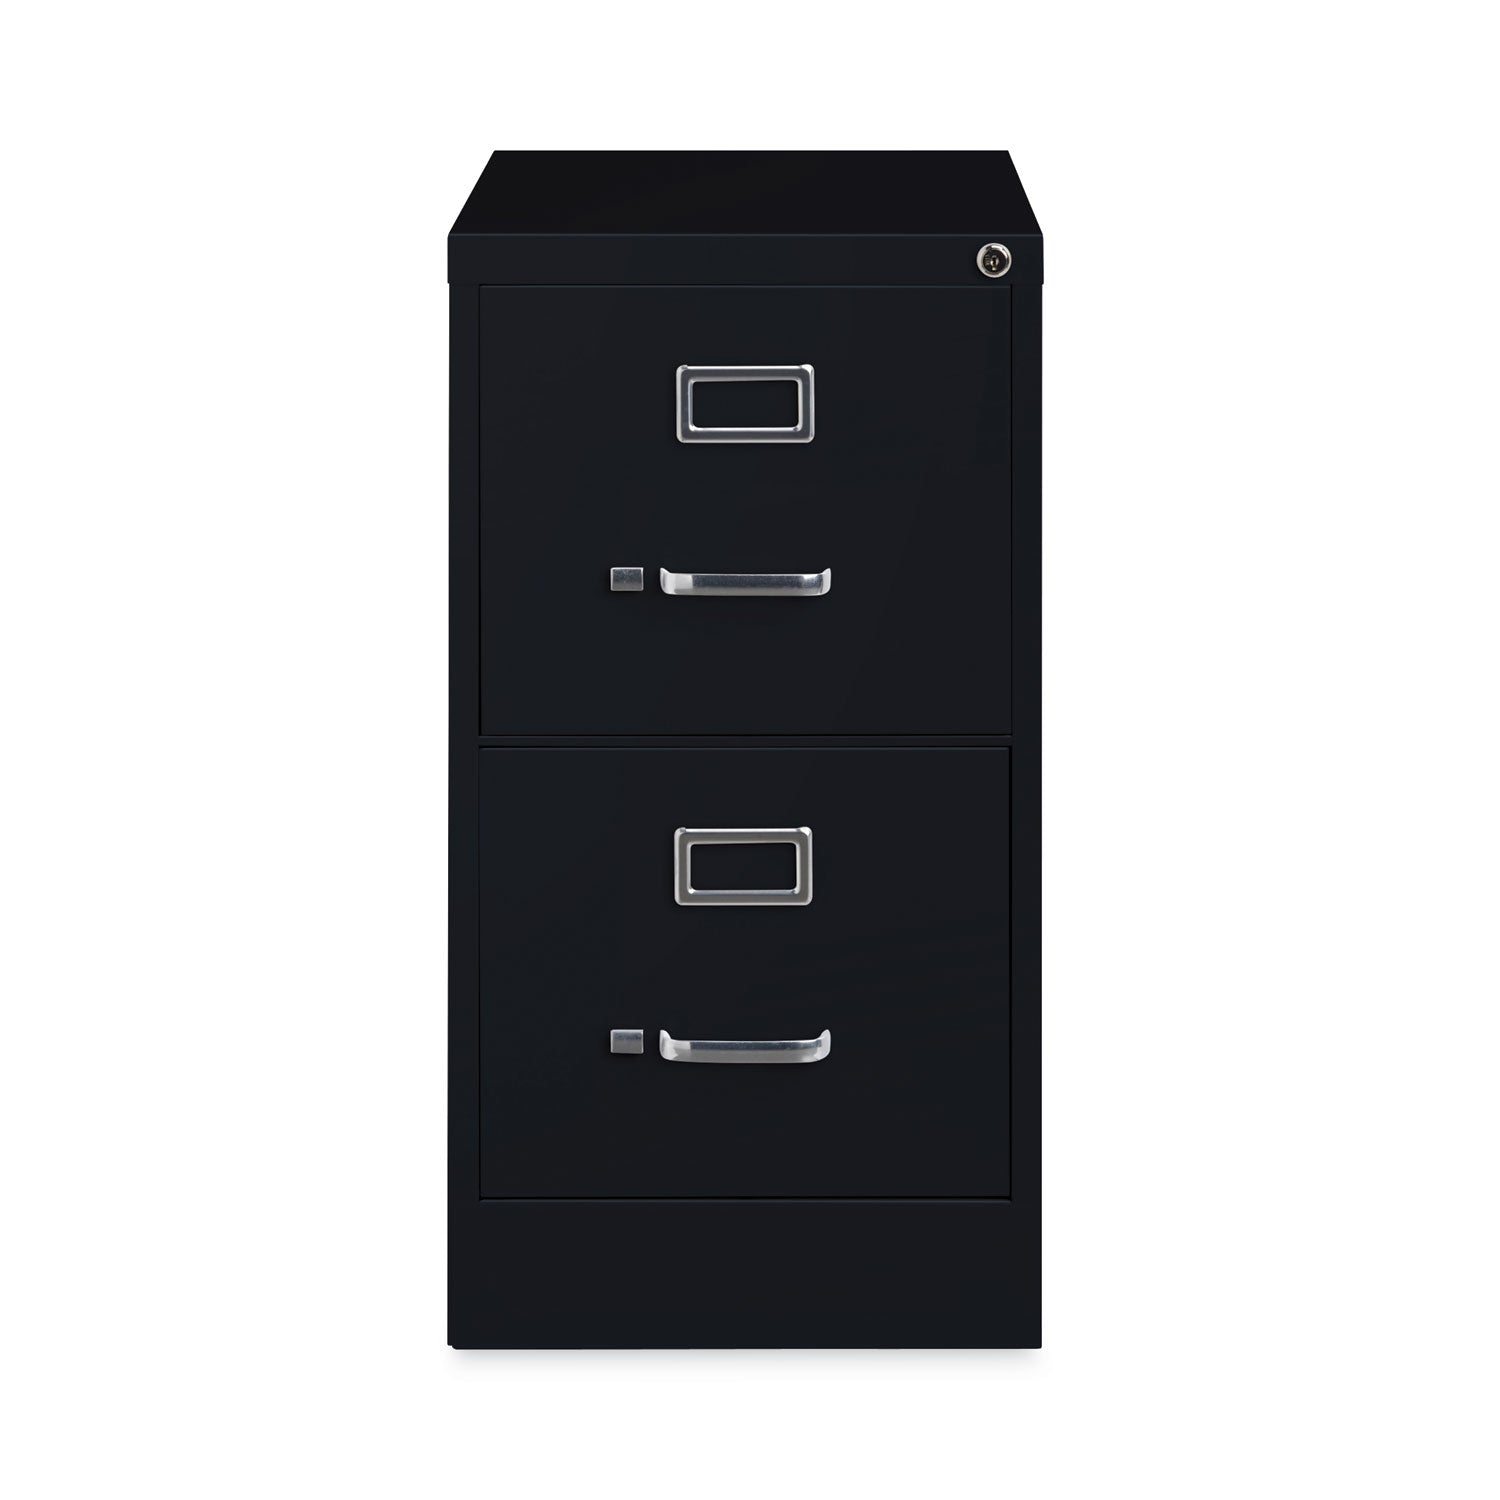 vertical-letter-file-cabinet-2-letter-size-file-drawers-black-15-x-22-x-2837_hid17890 - 1